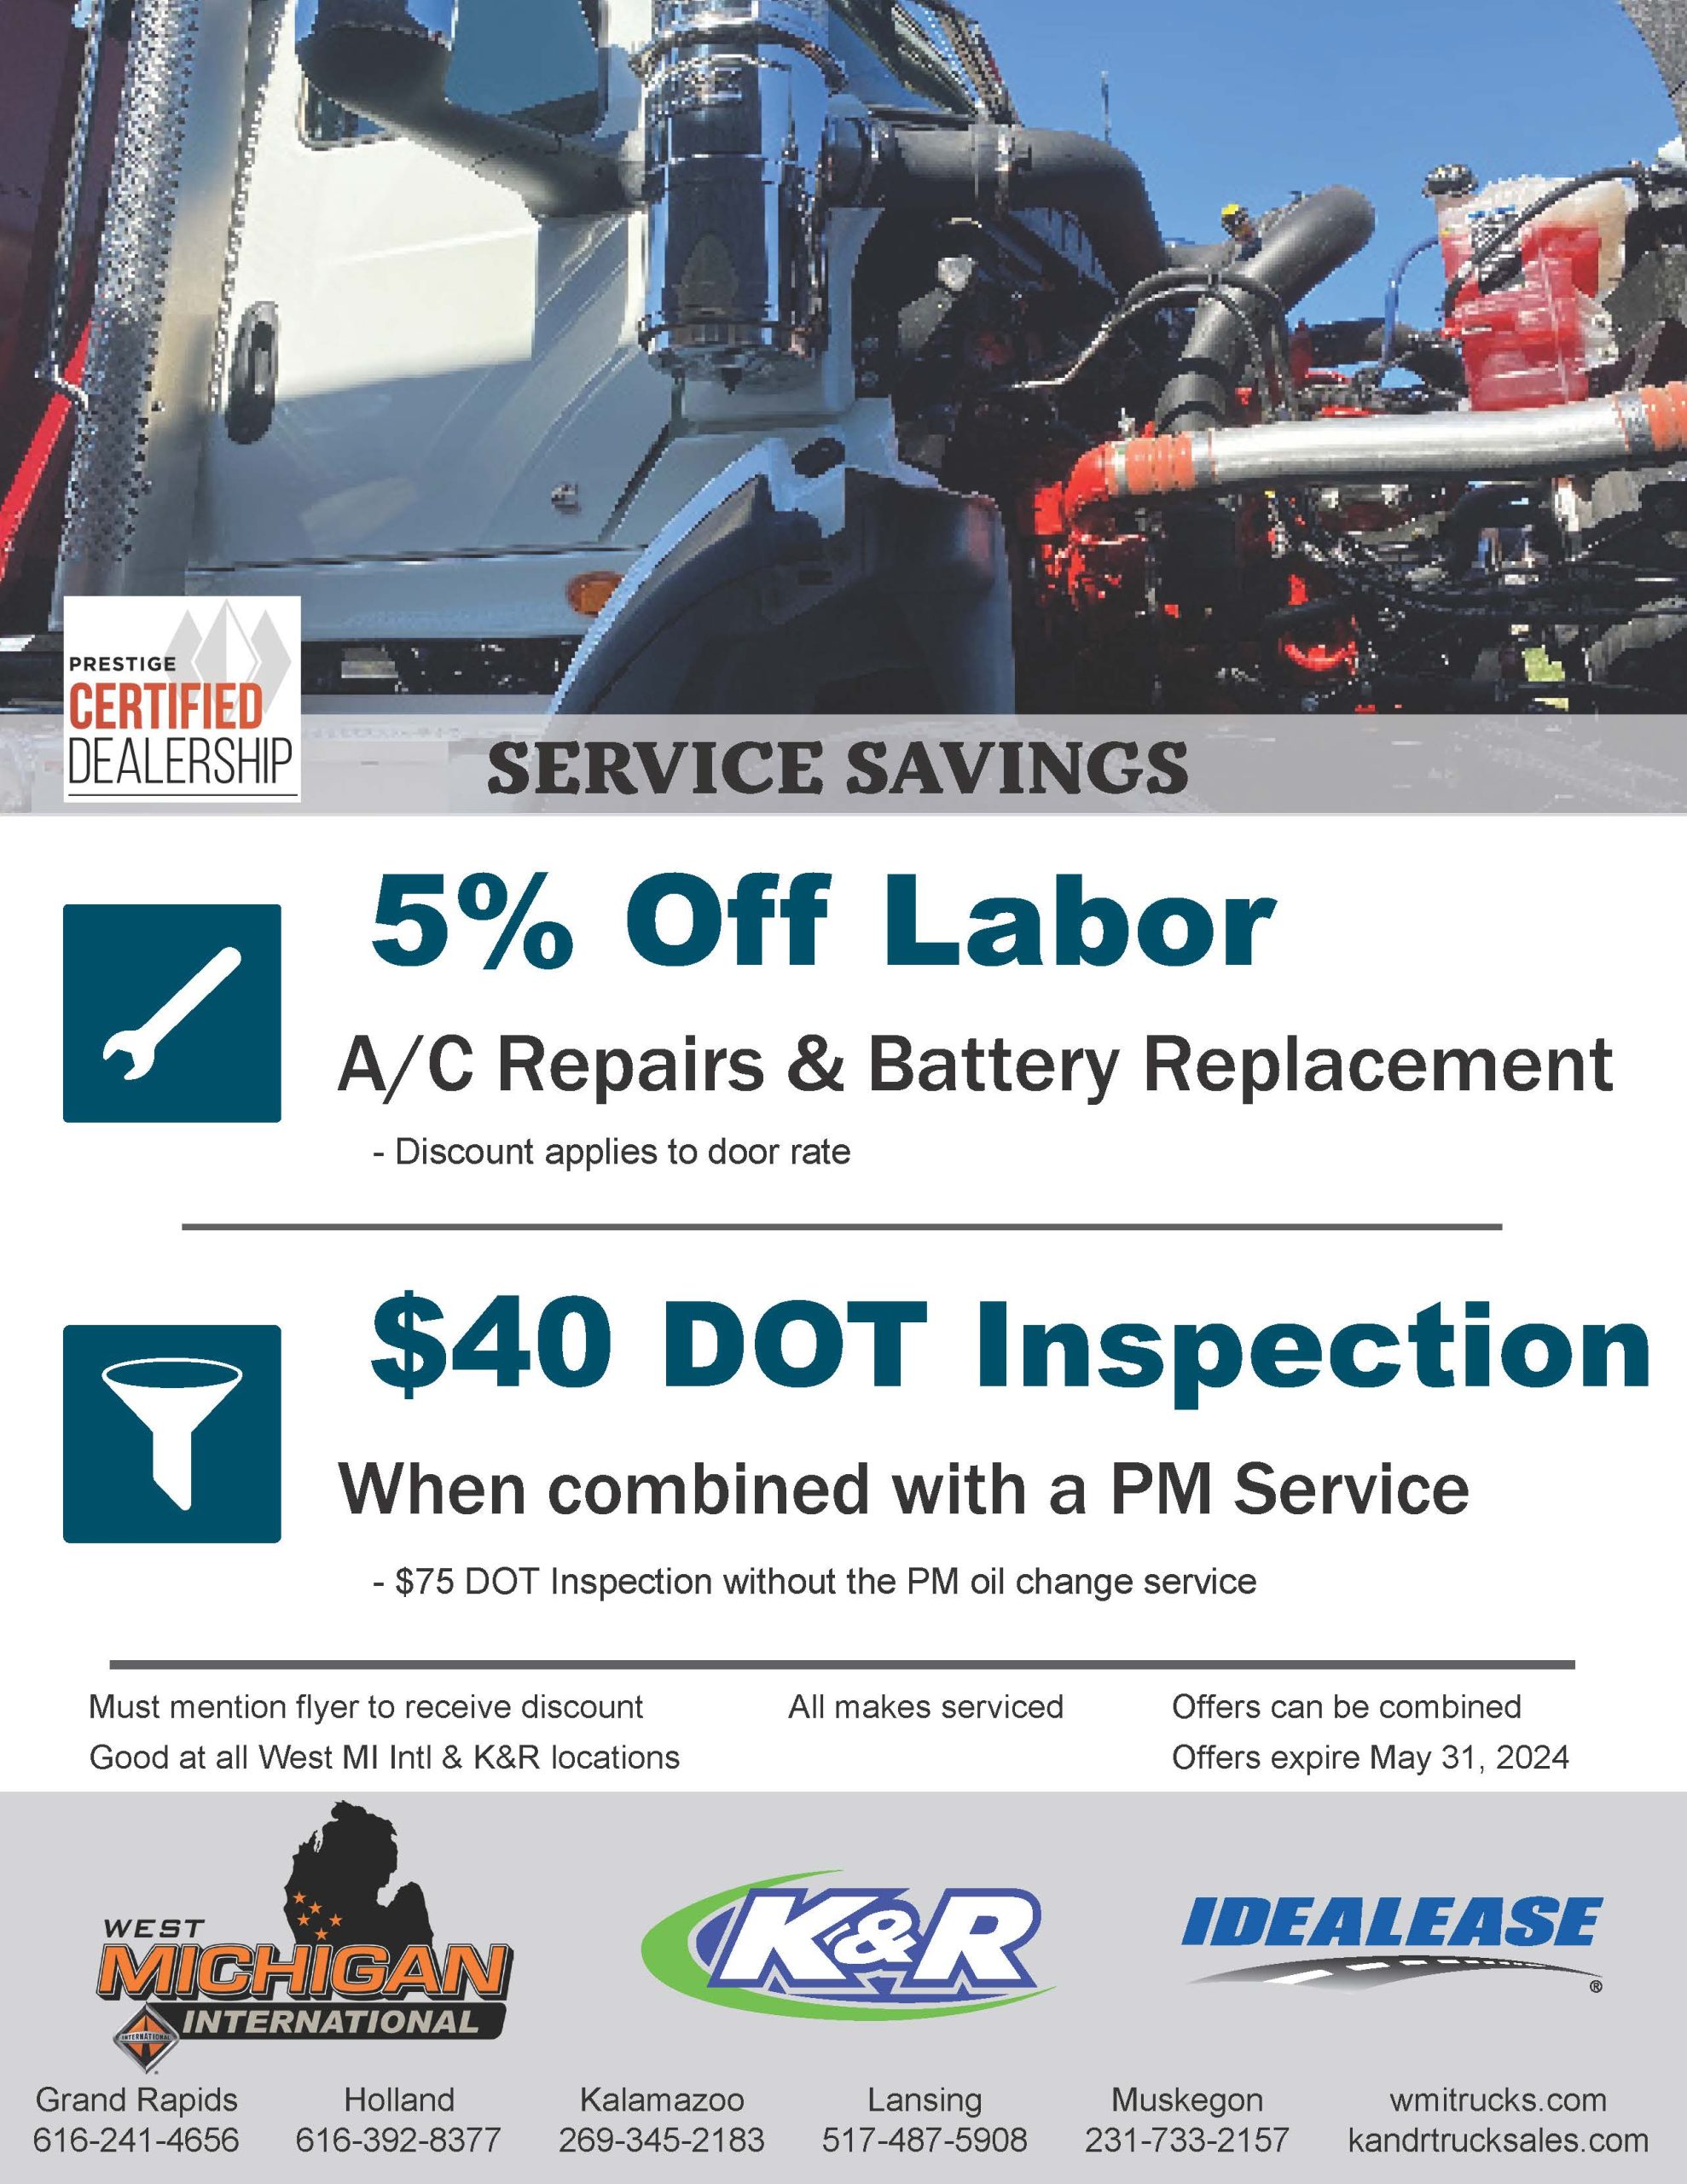 Service flyer on Truck repairs.